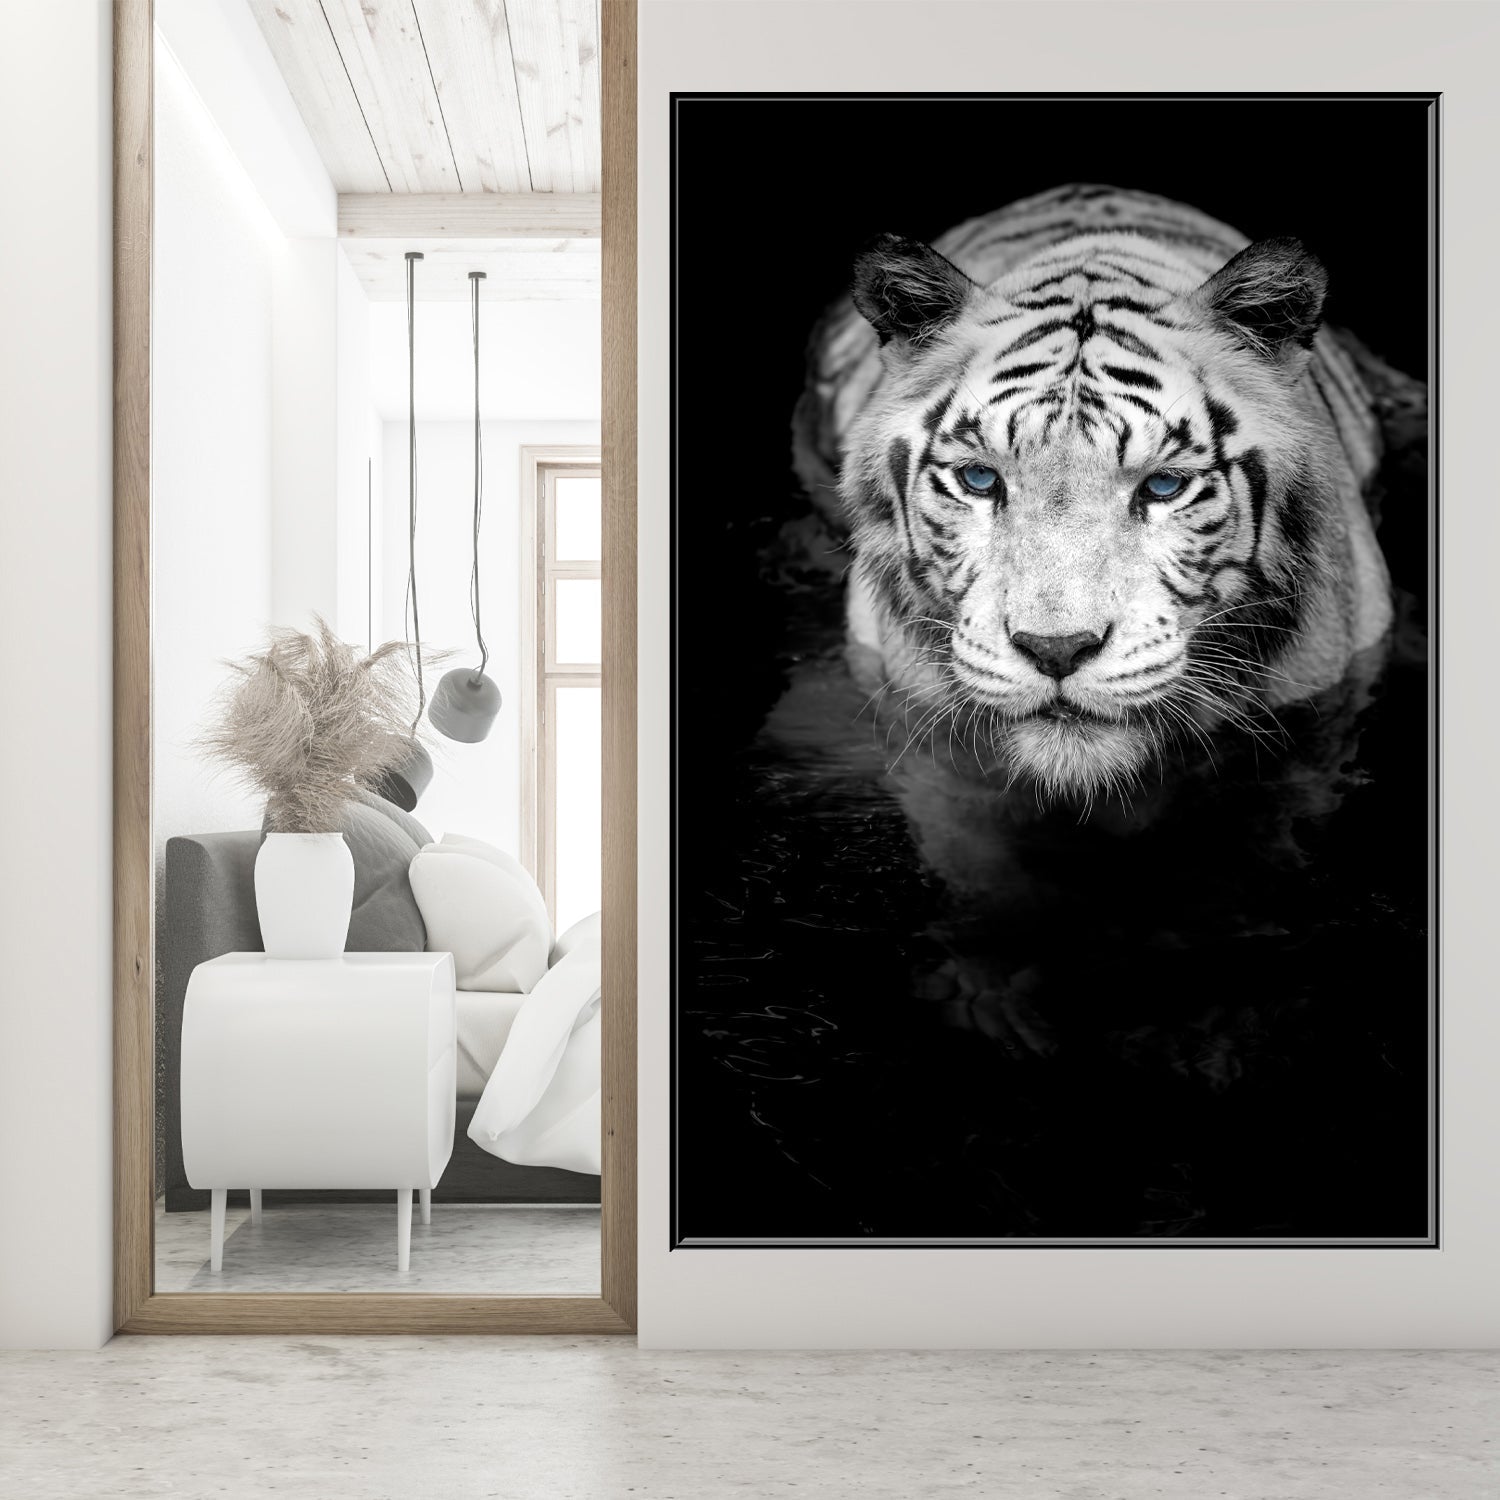 https://cdn.shopify.com/s/files/1/0387/9986/8044/products/WhiteTigerintheWaterCanvasArtprintStretched-4.jpg